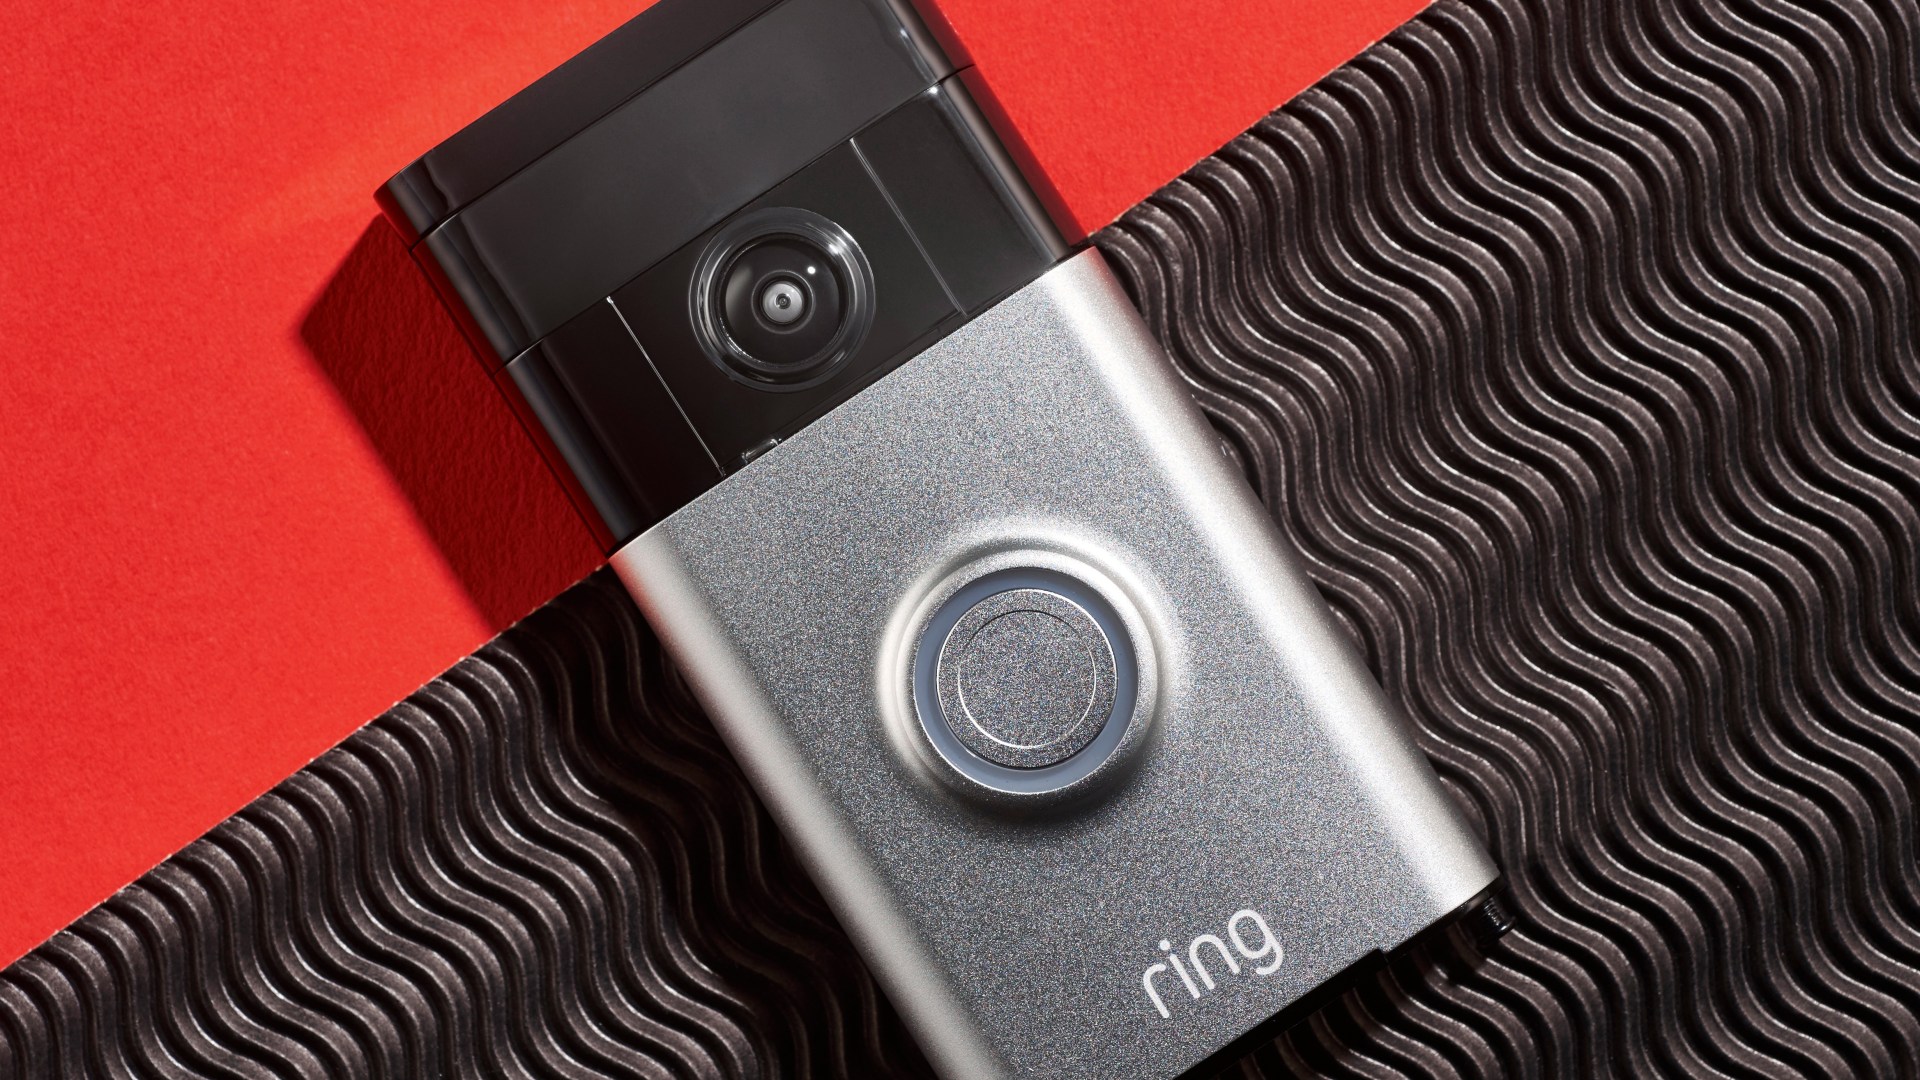 Ring Doorbell Owners Fume Over ‘Totally Disgusting’ Subscription Price Hike – Is It Time to Ditch the Gadget?